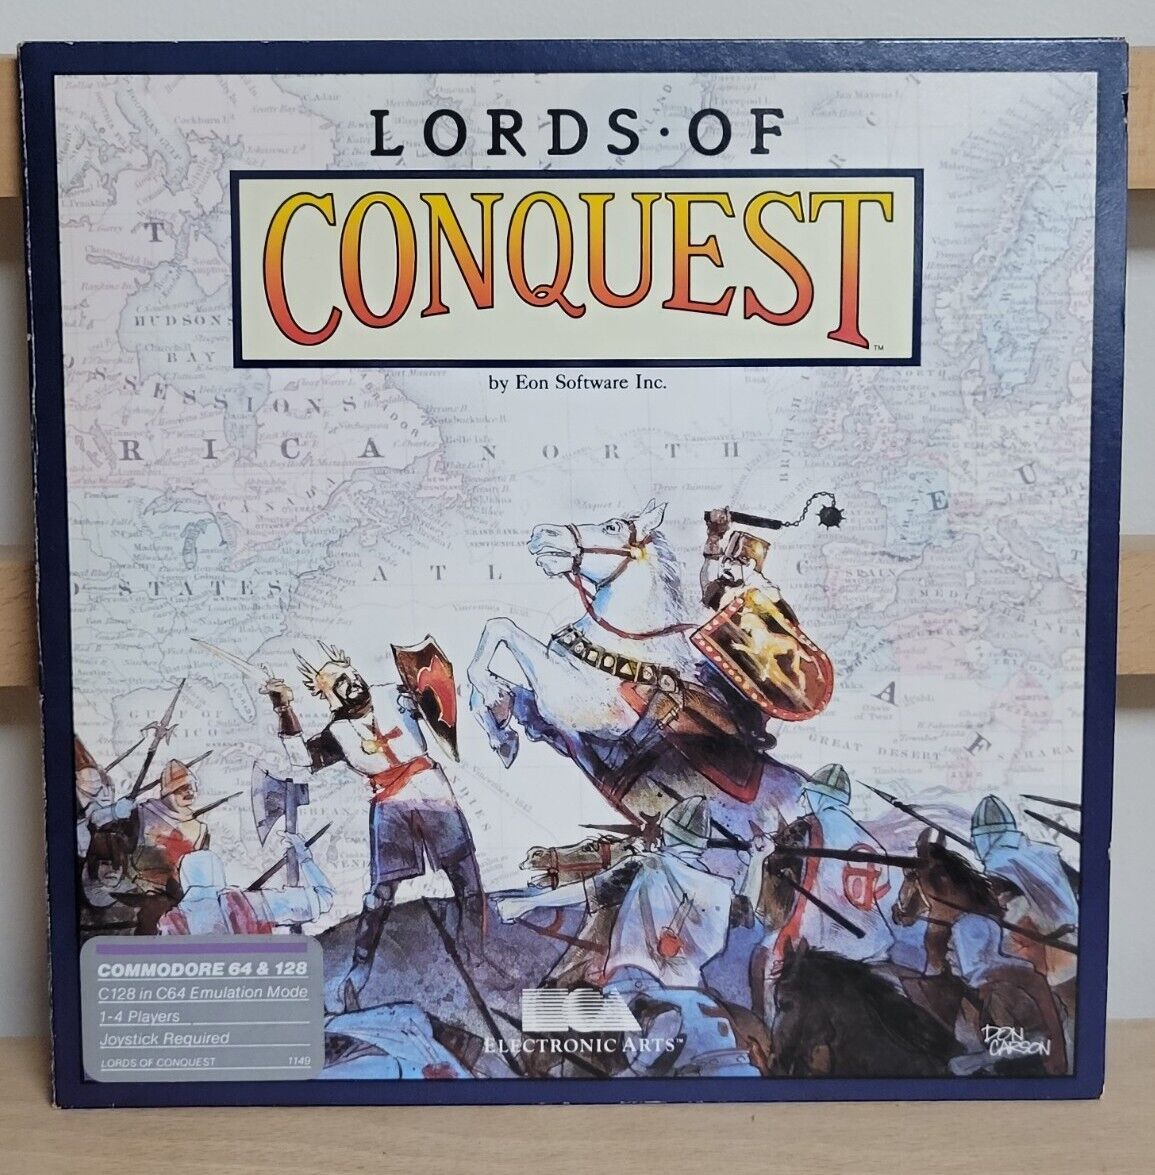 RARE VTG 1985 LORDS OF CONQUEST STRATEGY GAME EA COMMODORE 64 C64 128 EXCELLENT!